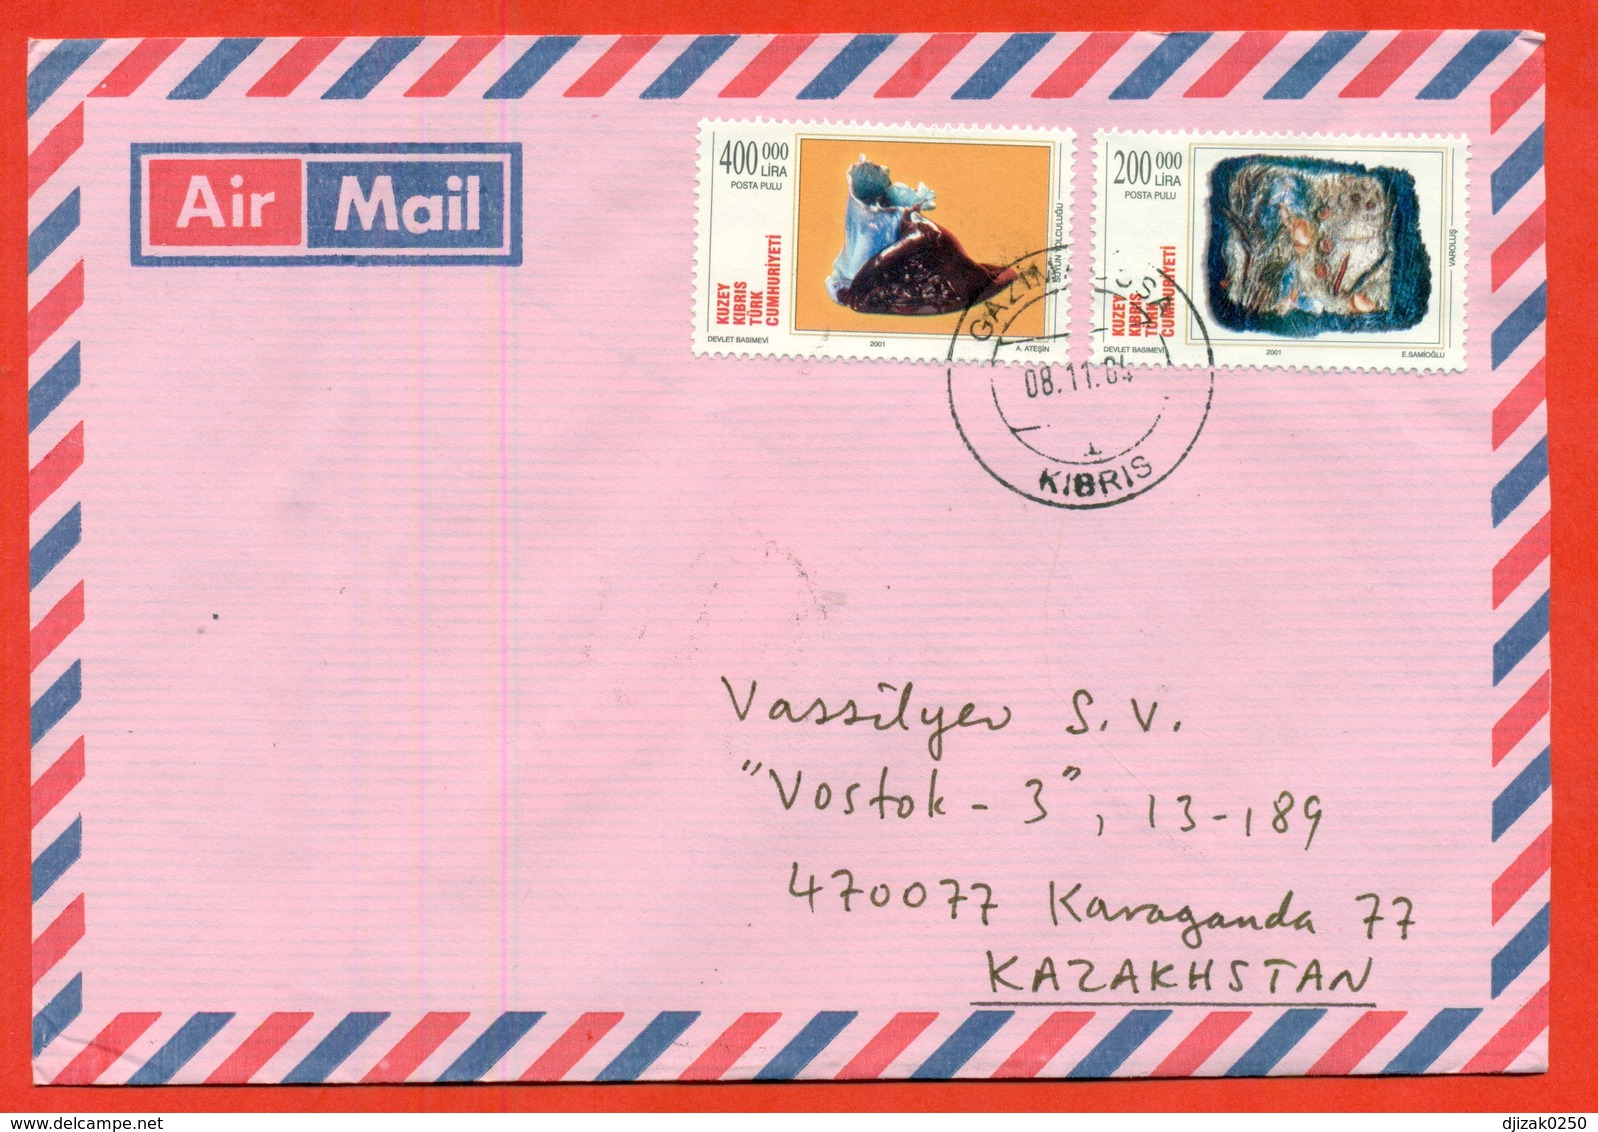 Cyprus (Turkey) 2001.Moderne Art. Envelope Really Passed The Mail.Airmail. - Covers & Documents